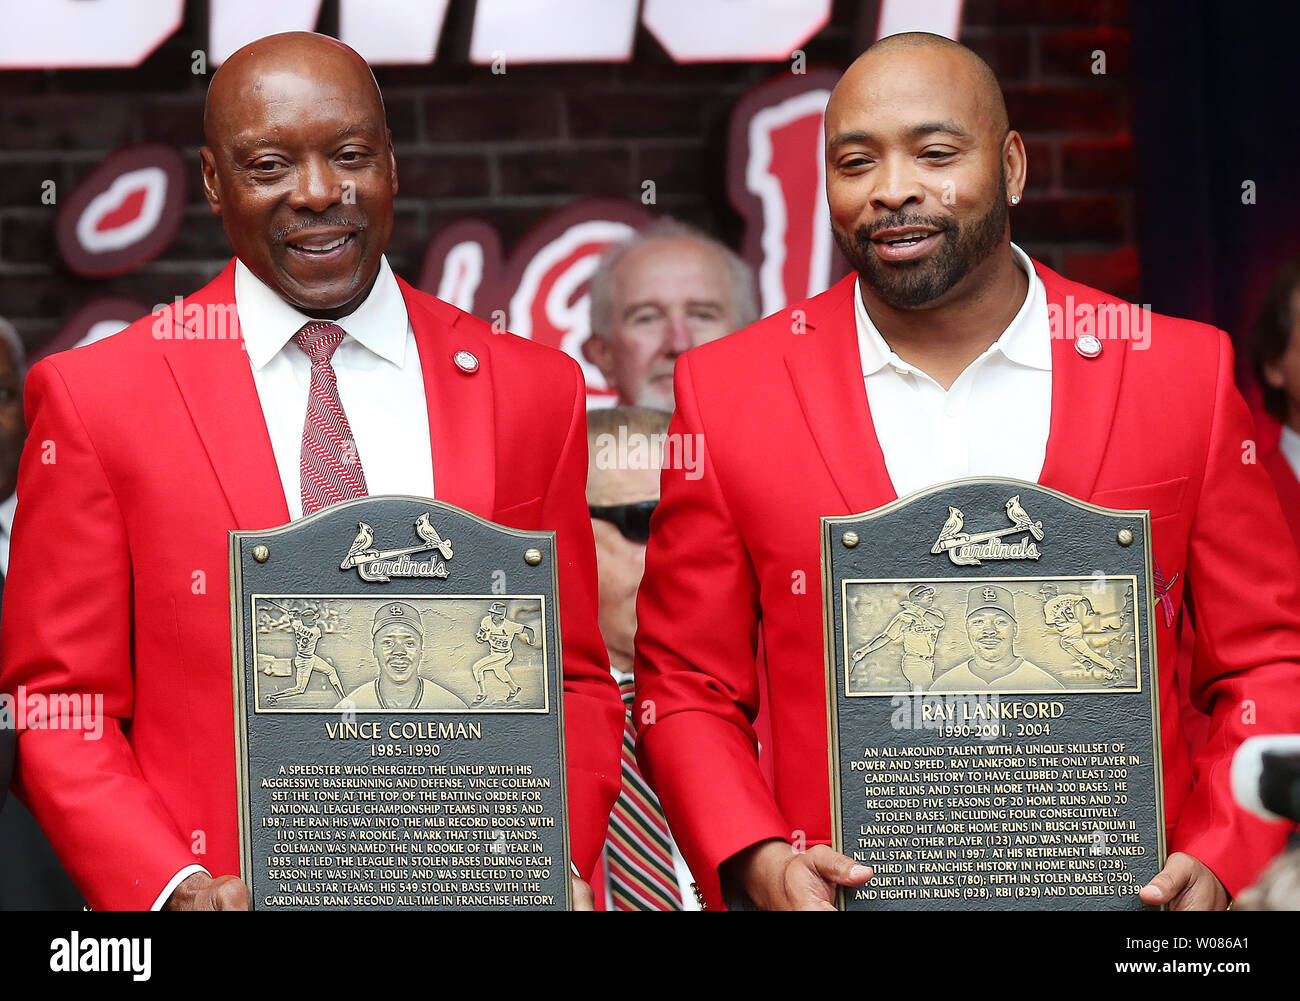 My @cardinals teammates and friends from the 80's. Vince Coleman,  @williemcgeeofficial, @kher1737 on HOF day for Keith's induction.…